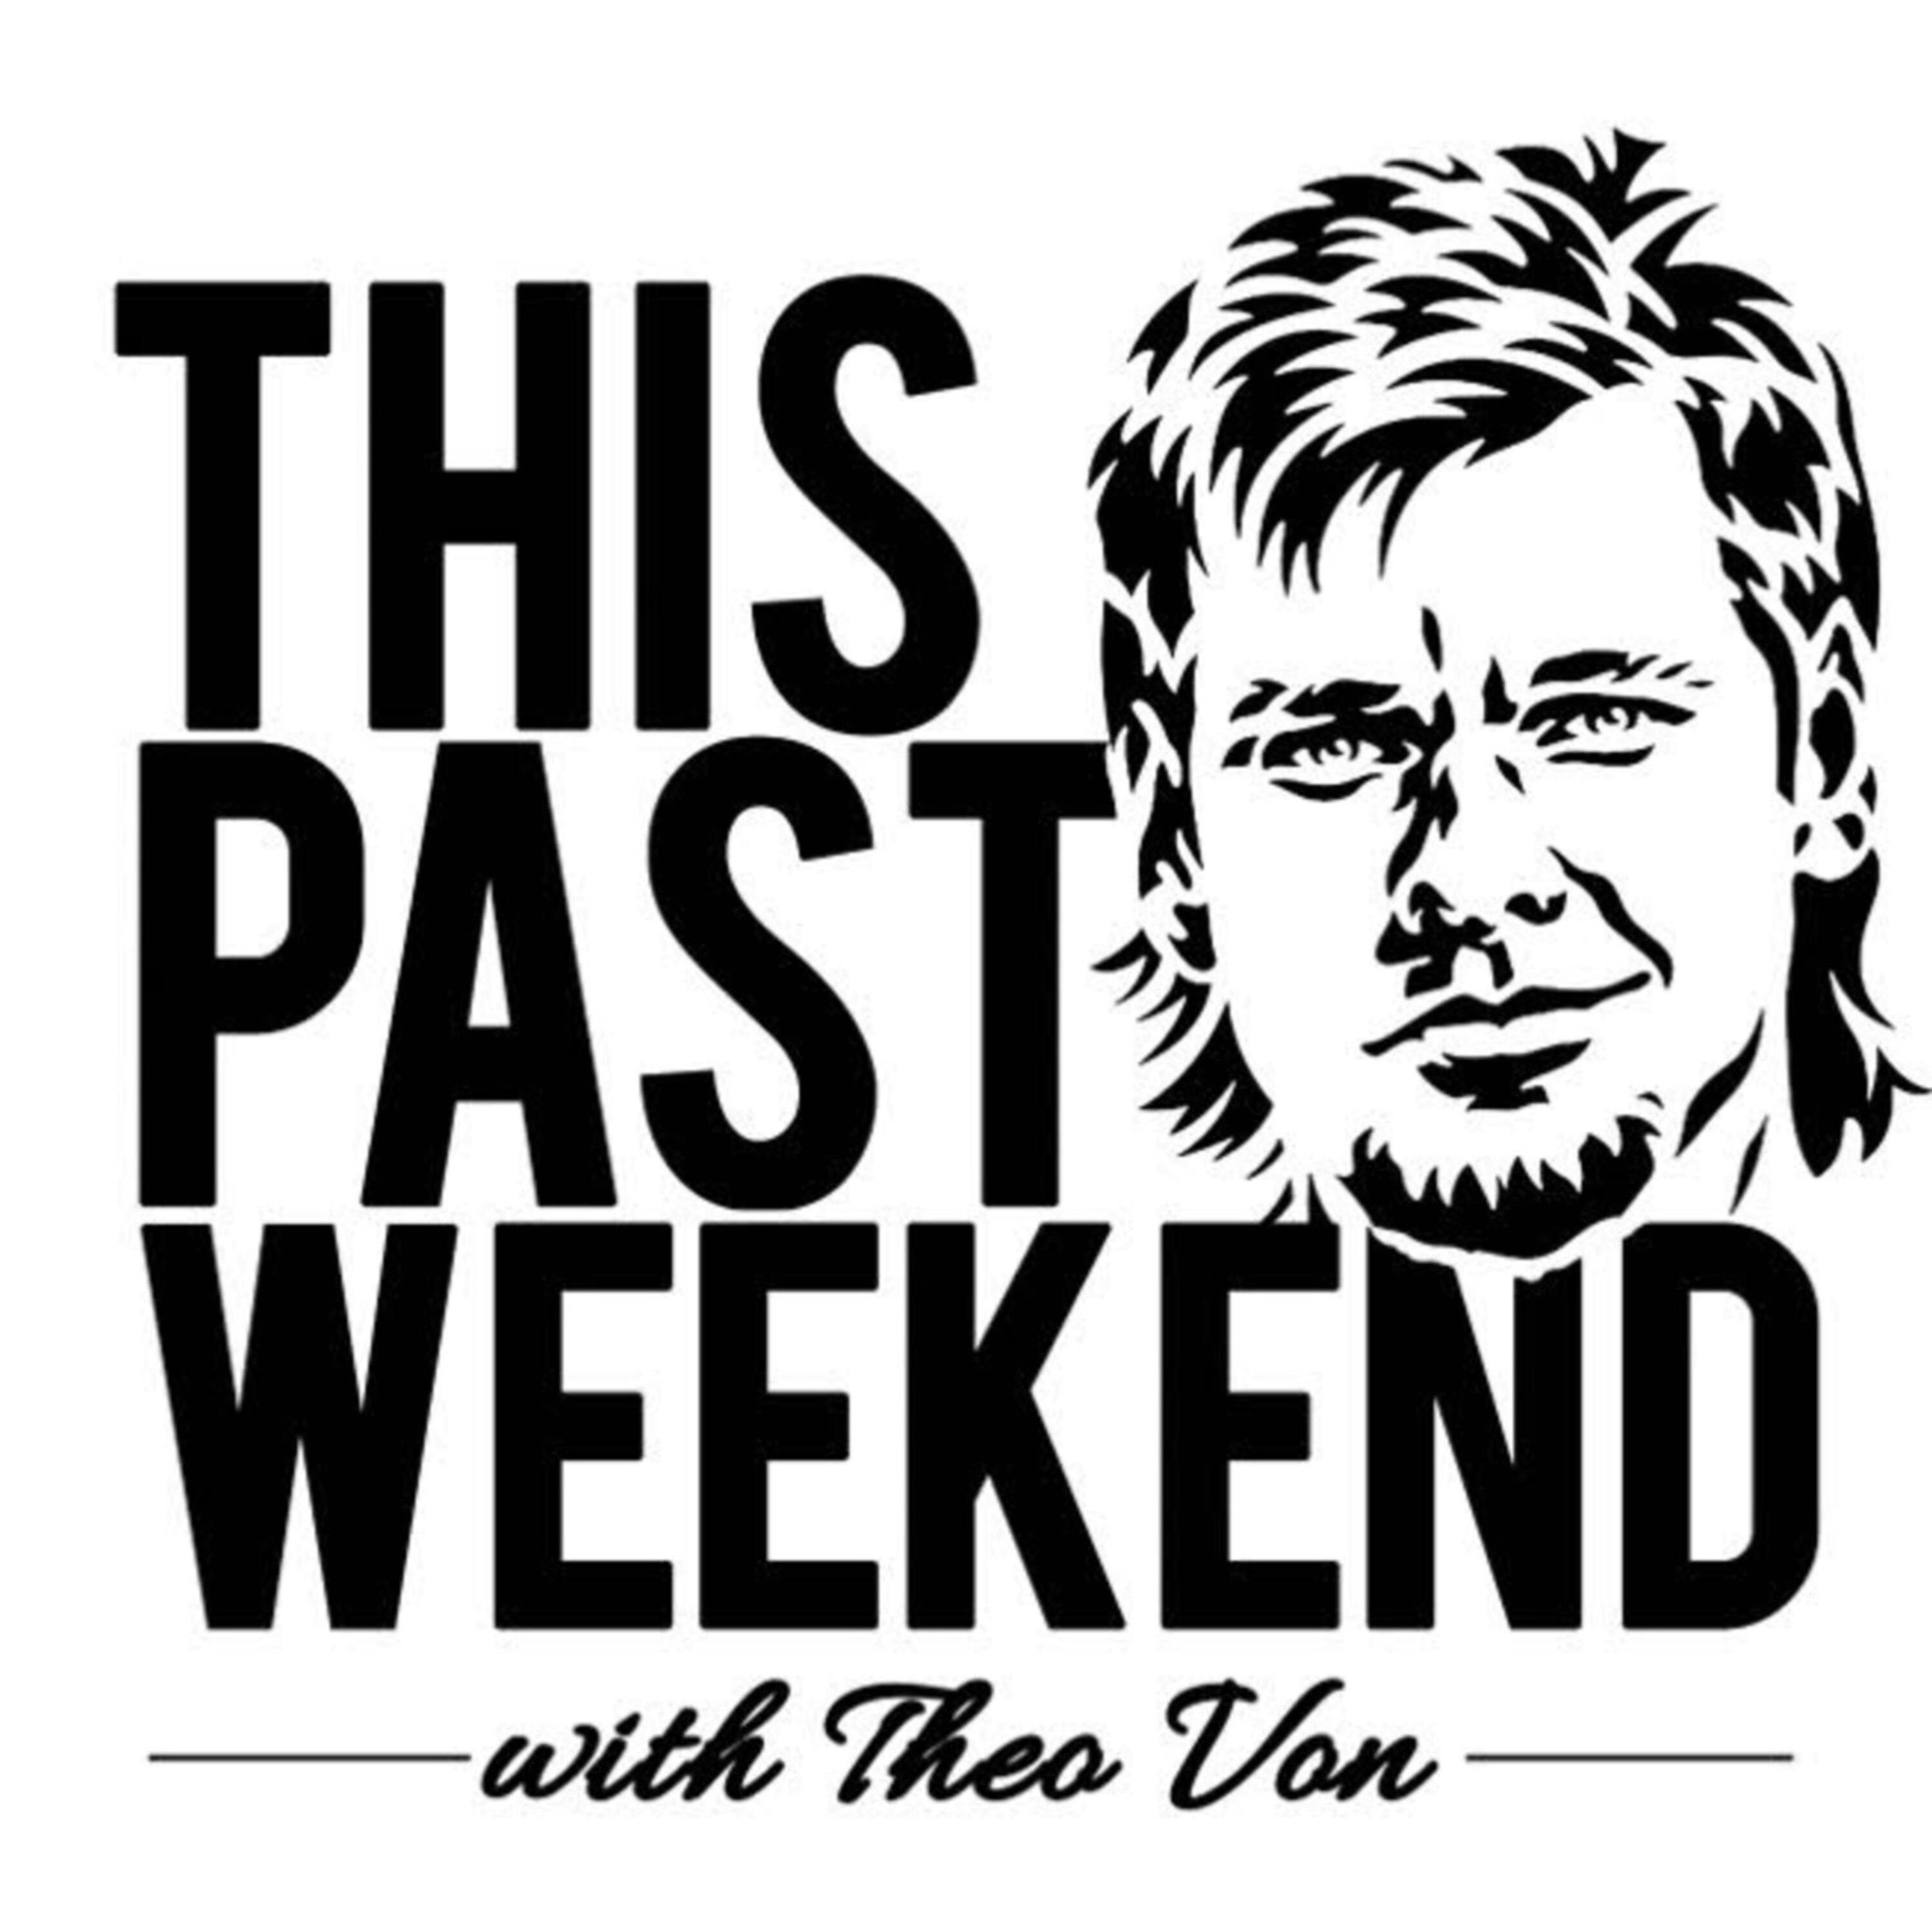 Tim Dillon and Logan Paul | This Past Weekend #228 by Theo Von